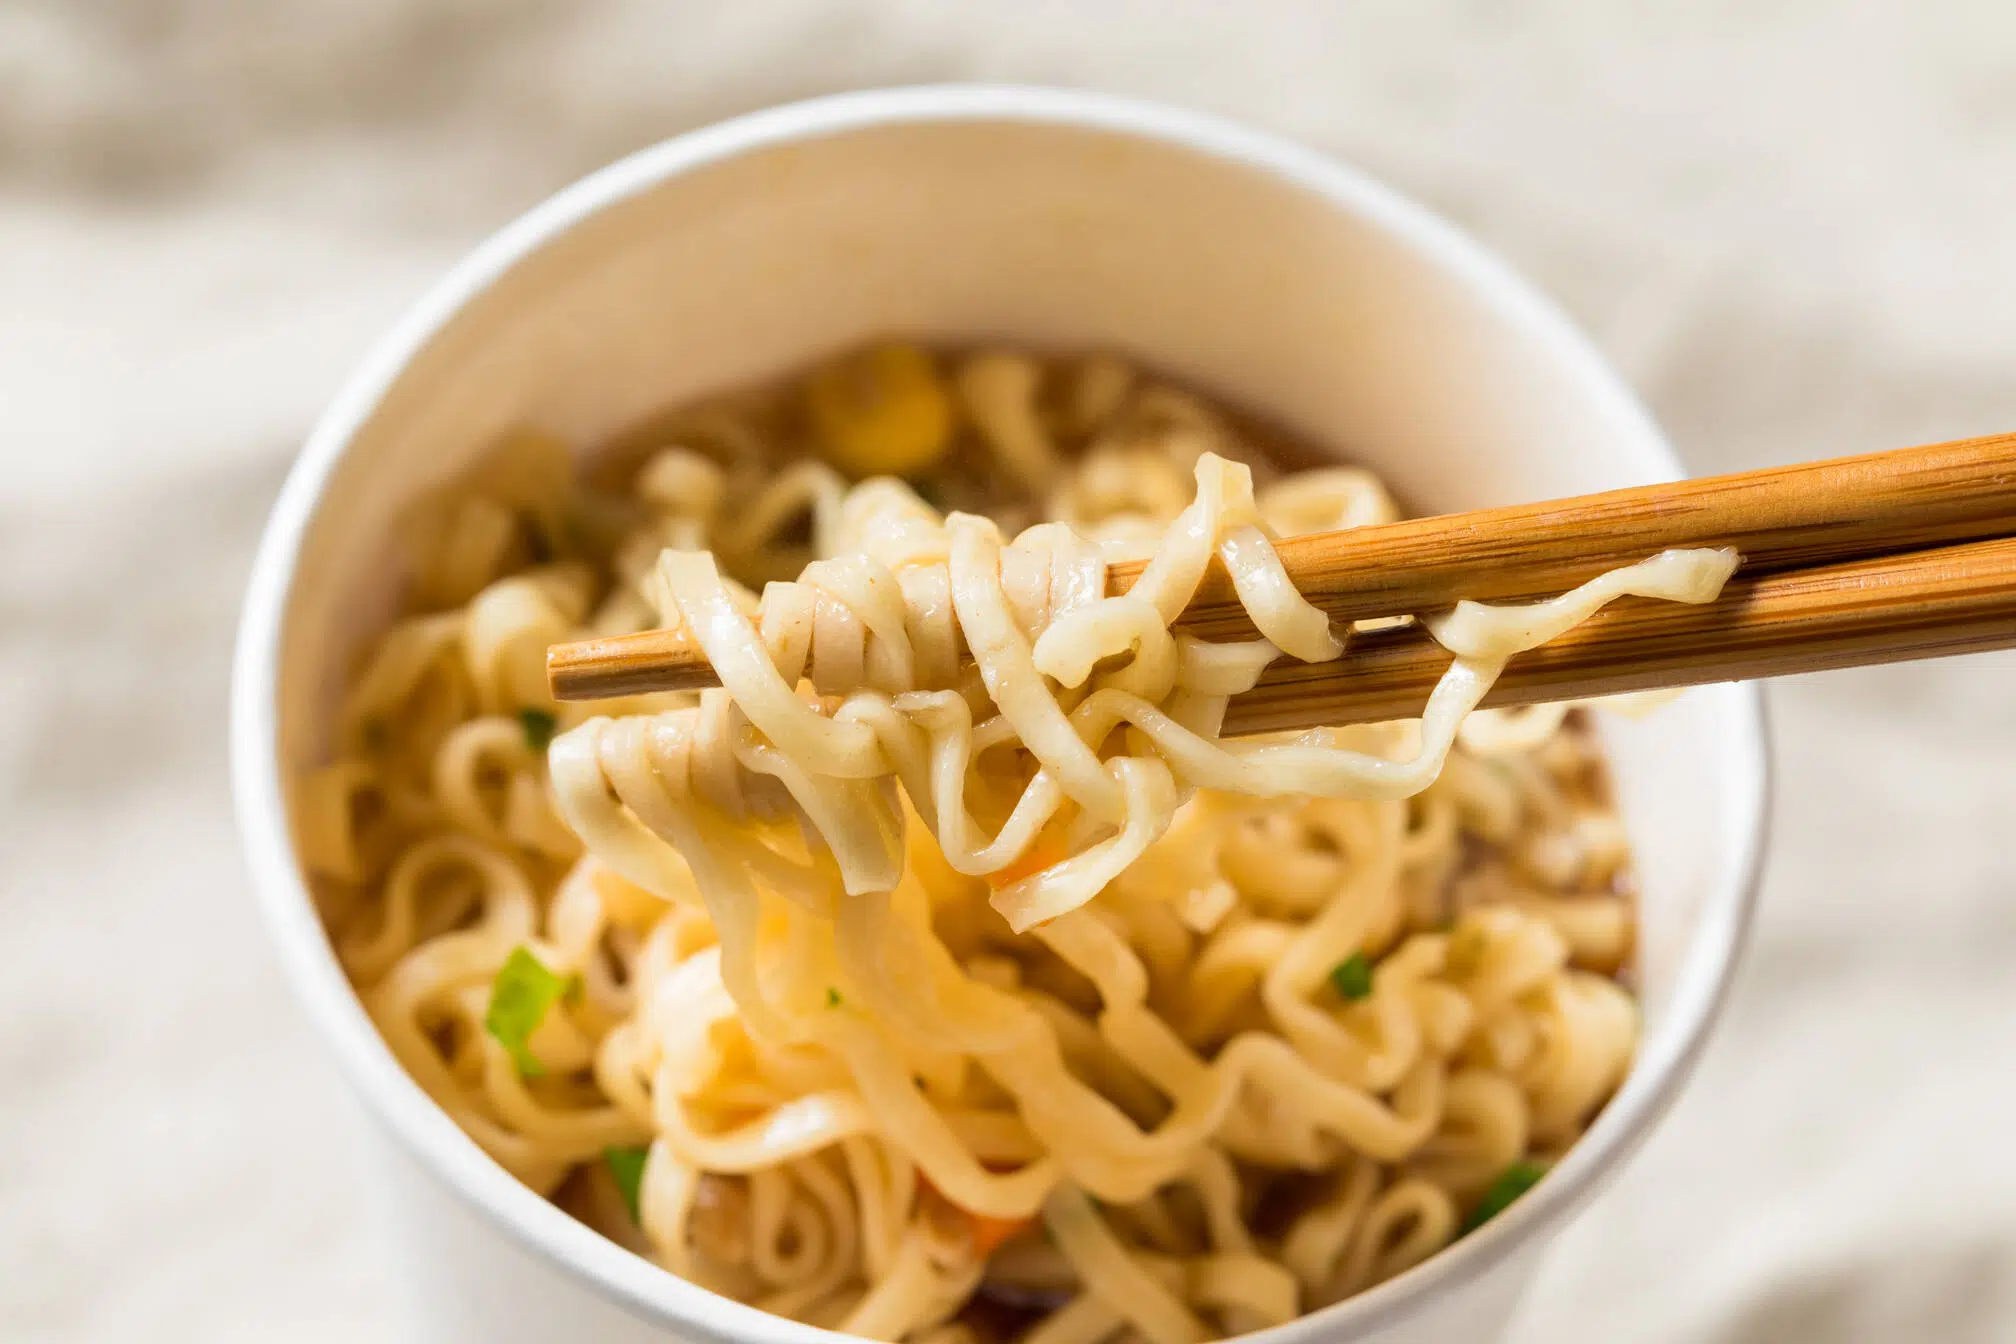 Does Ramen Expire - How Long Is The Shelf Life?